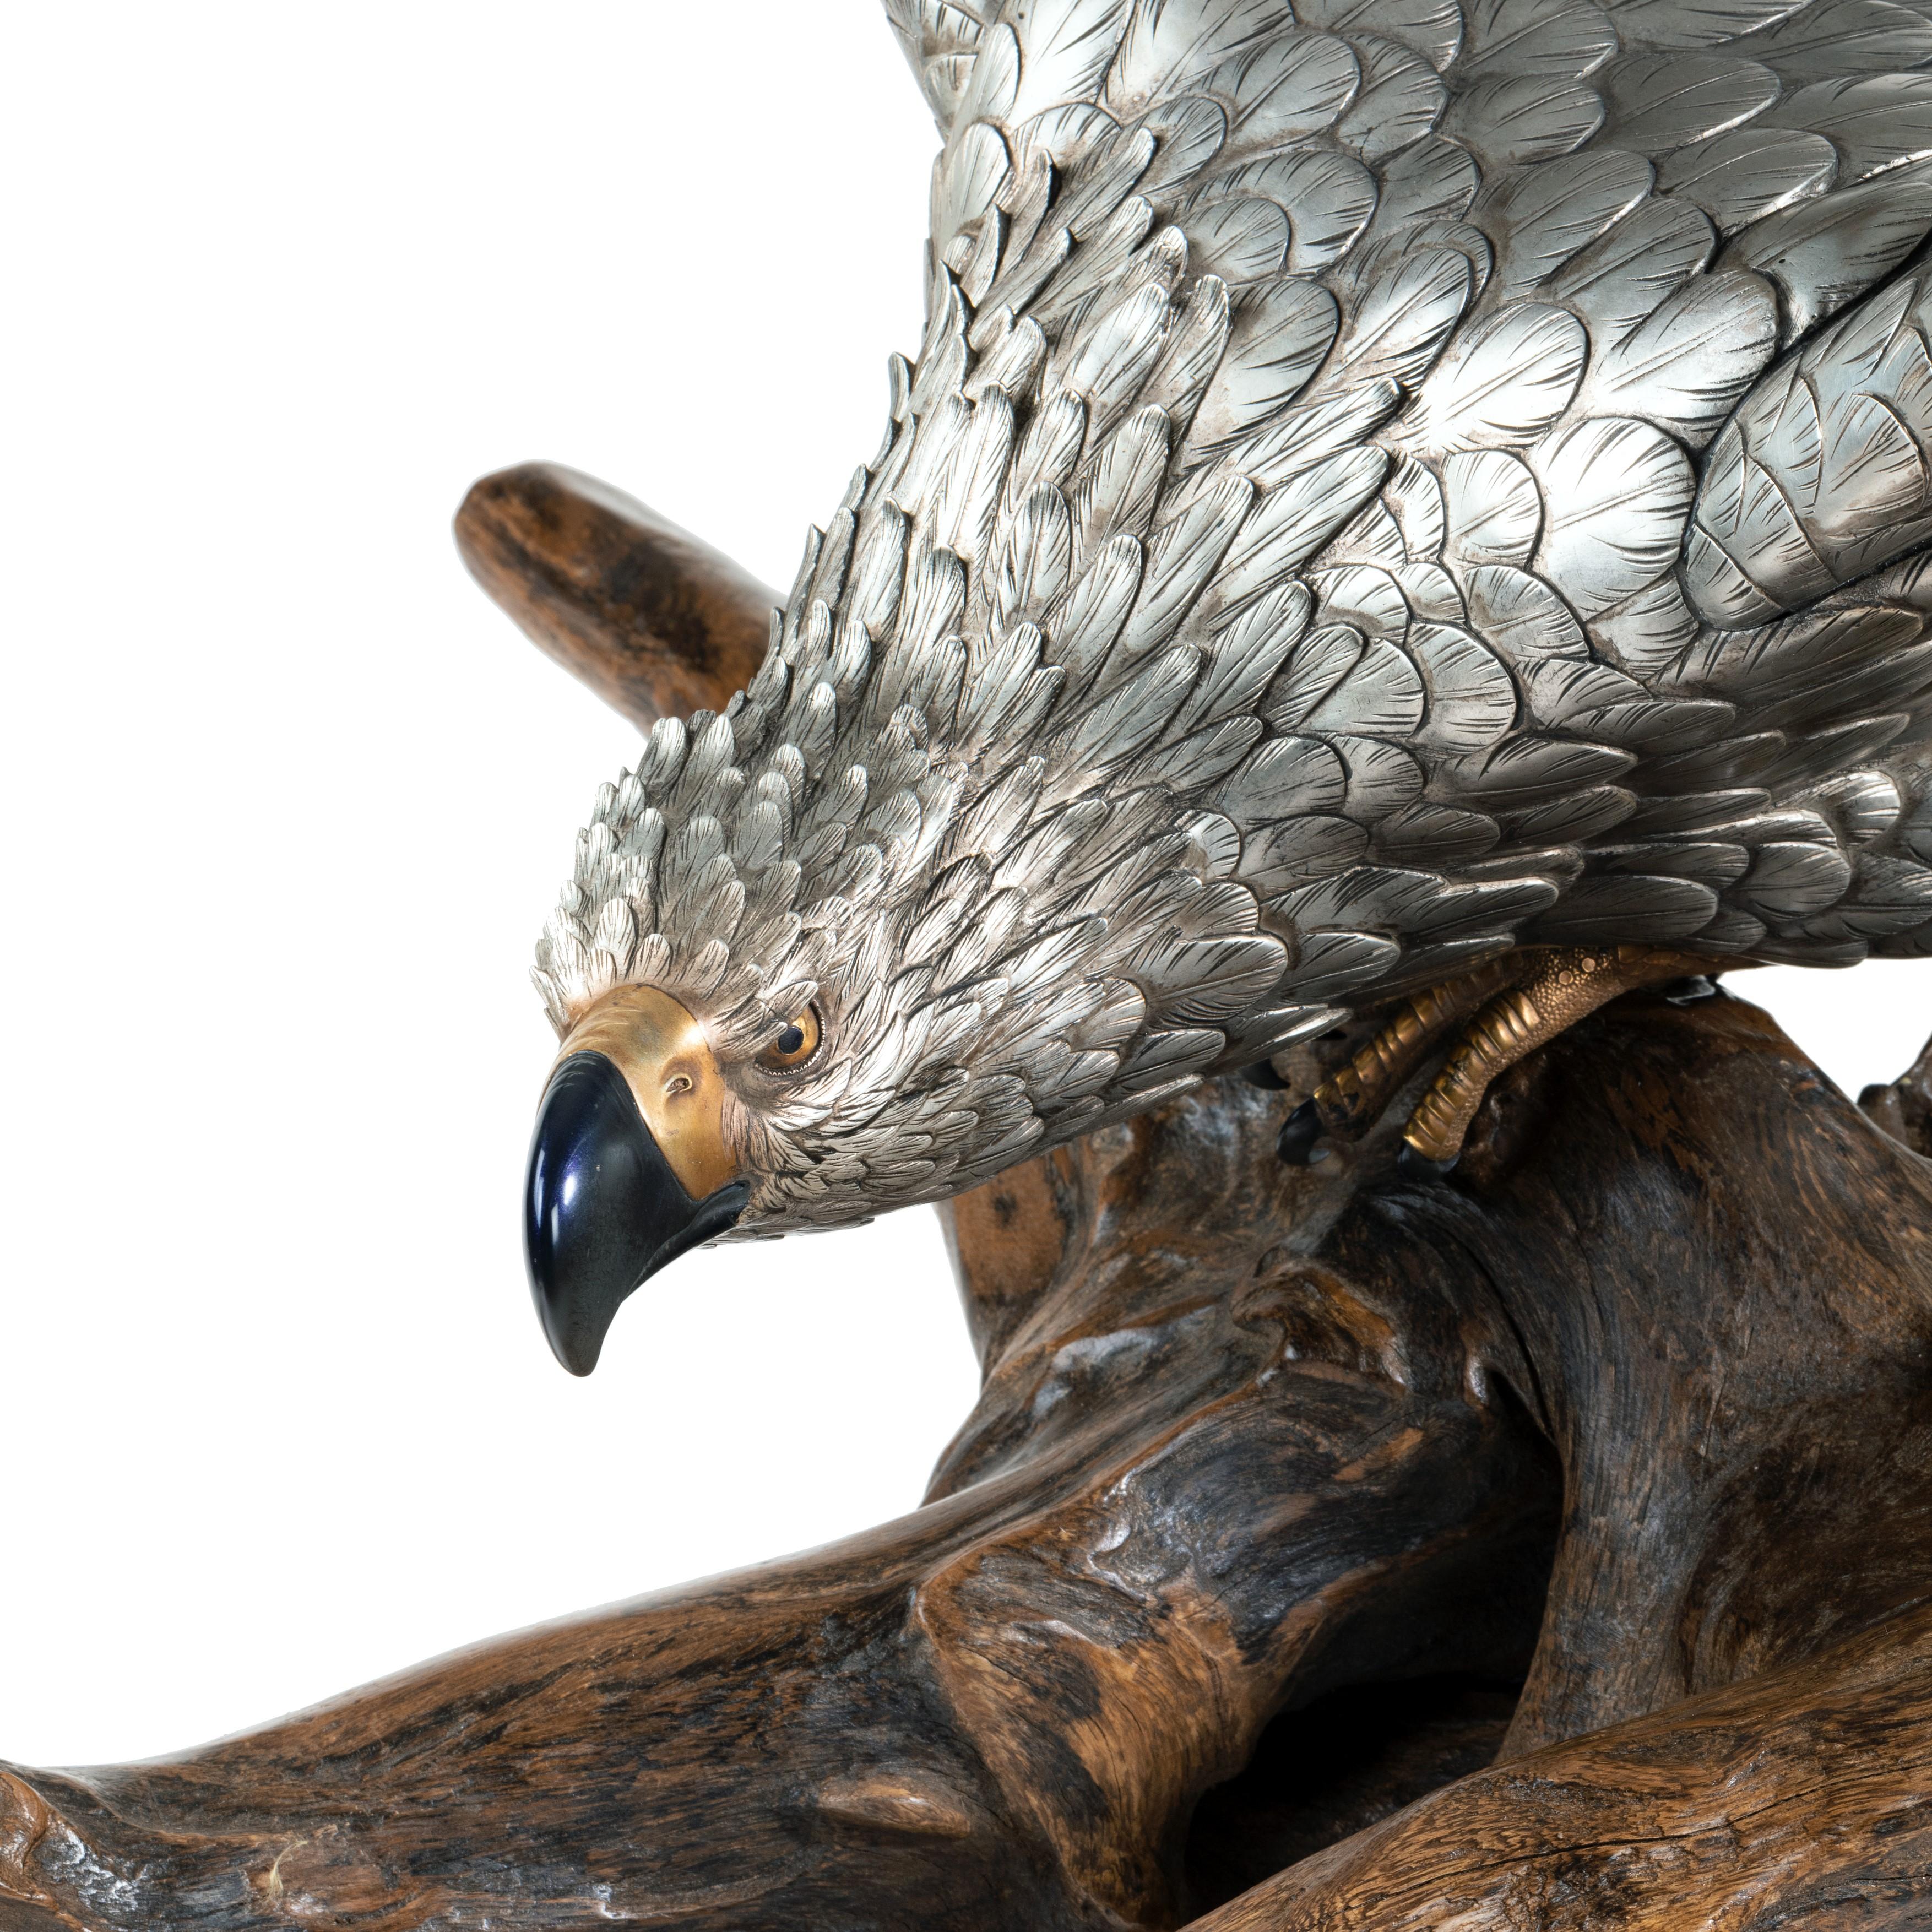 A very large and imposing Meiji period silvered bronze eagle, shown crouched on a rootwood base with the wings raised in the head ducked down and turned slightly to the left, the eyes and talons worked with shakudo and gilt details. Signed on a